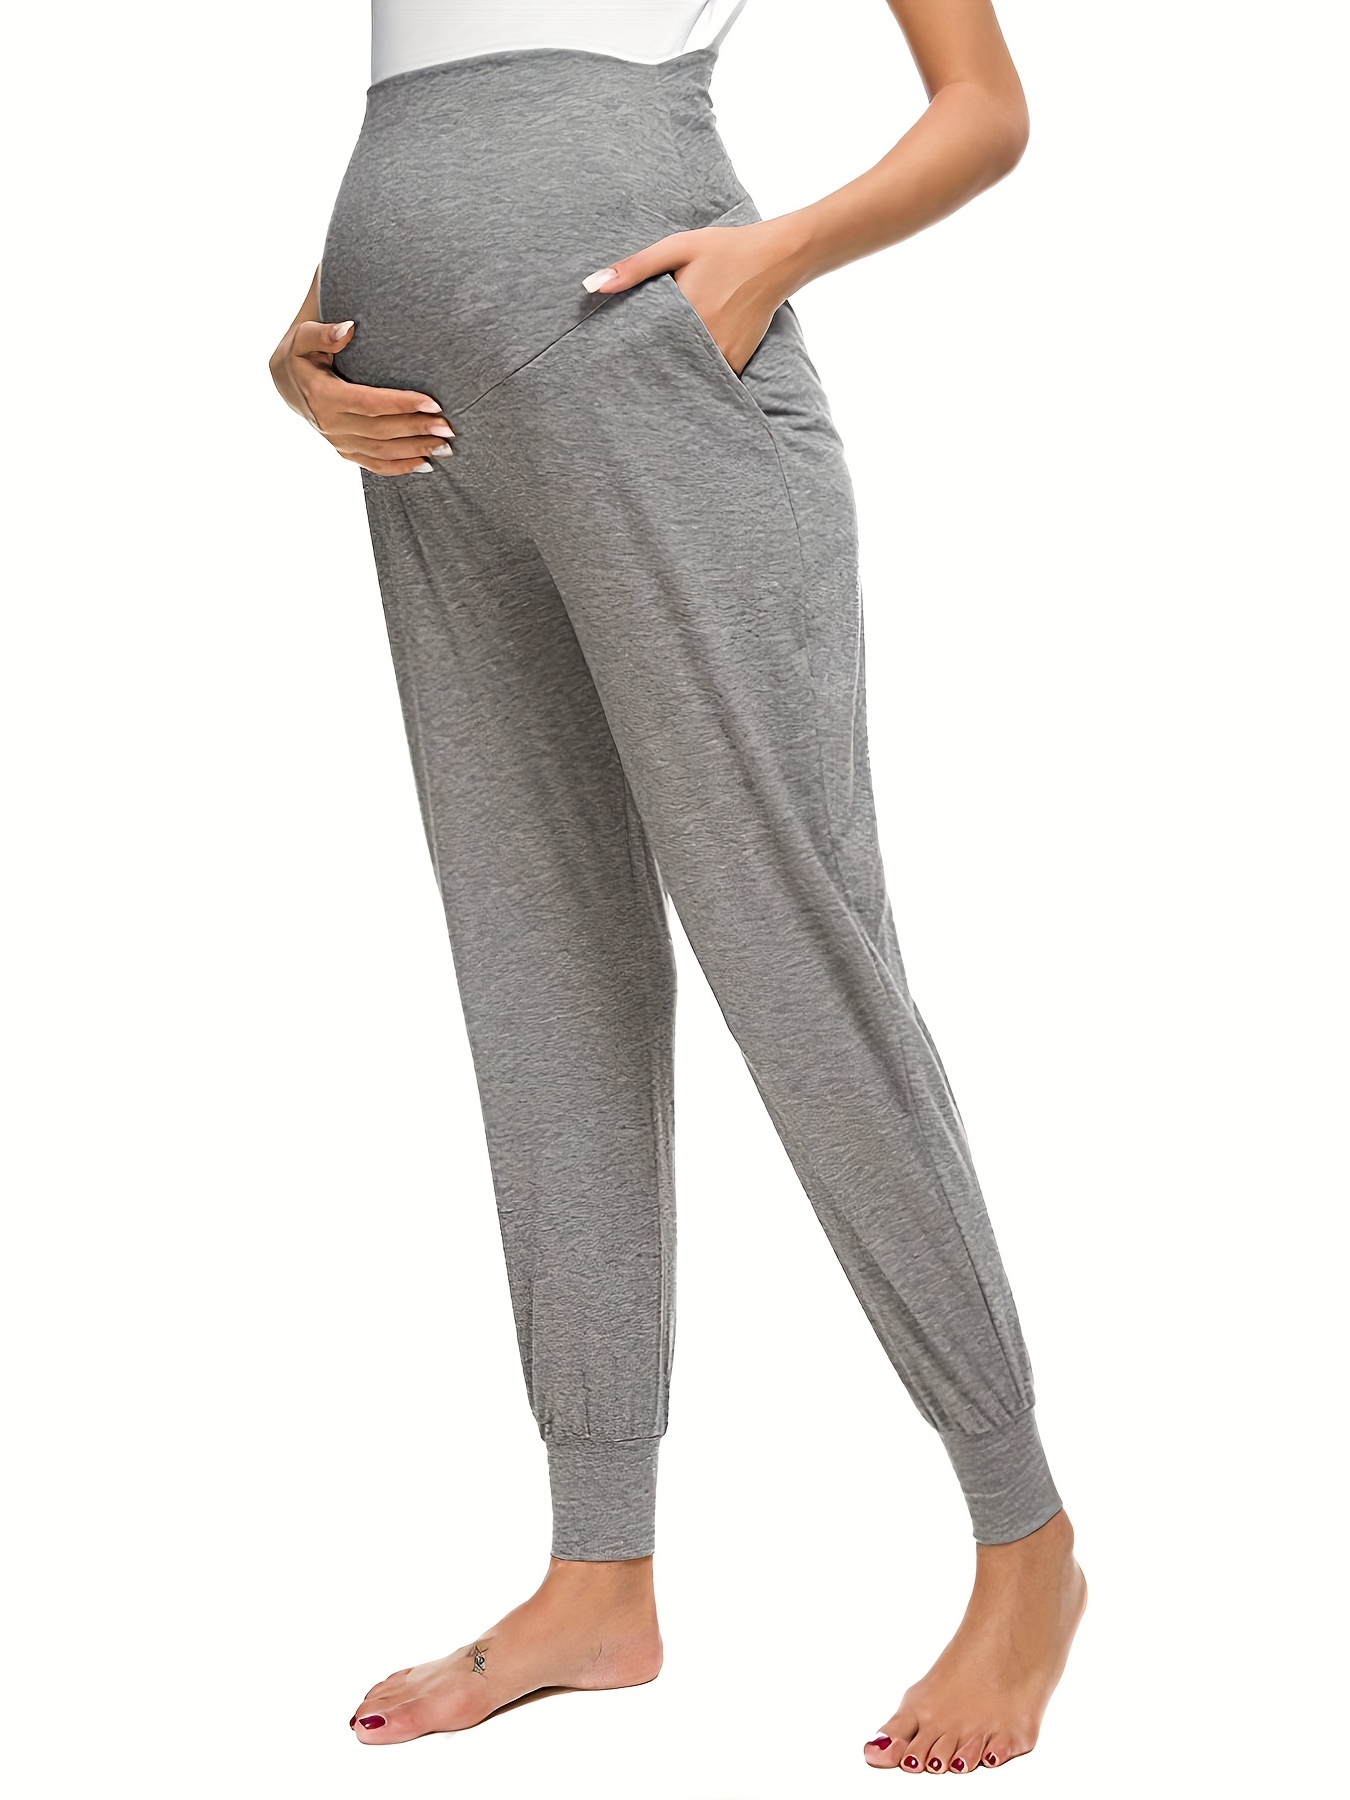 Shop. Rent. Sell: Gently Used Maternity Clothes Online